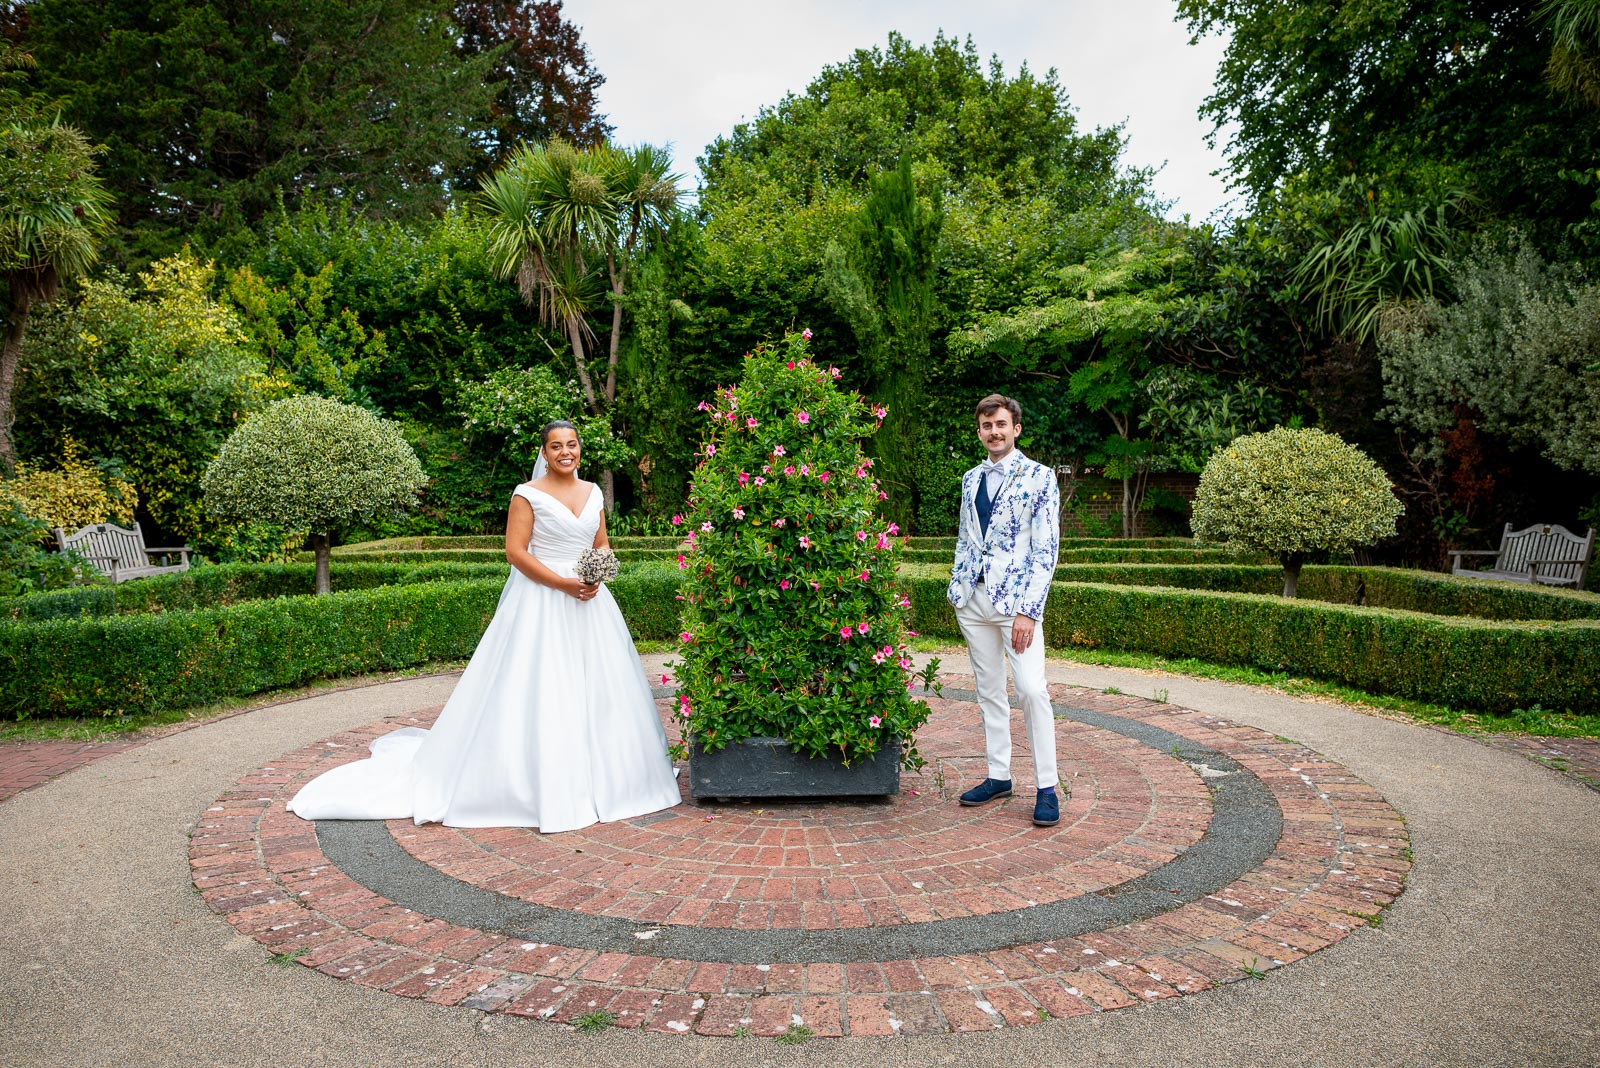 Olivia and Edward pose in the Secret Garden at Southover Grange in Lewes after their Wedding.